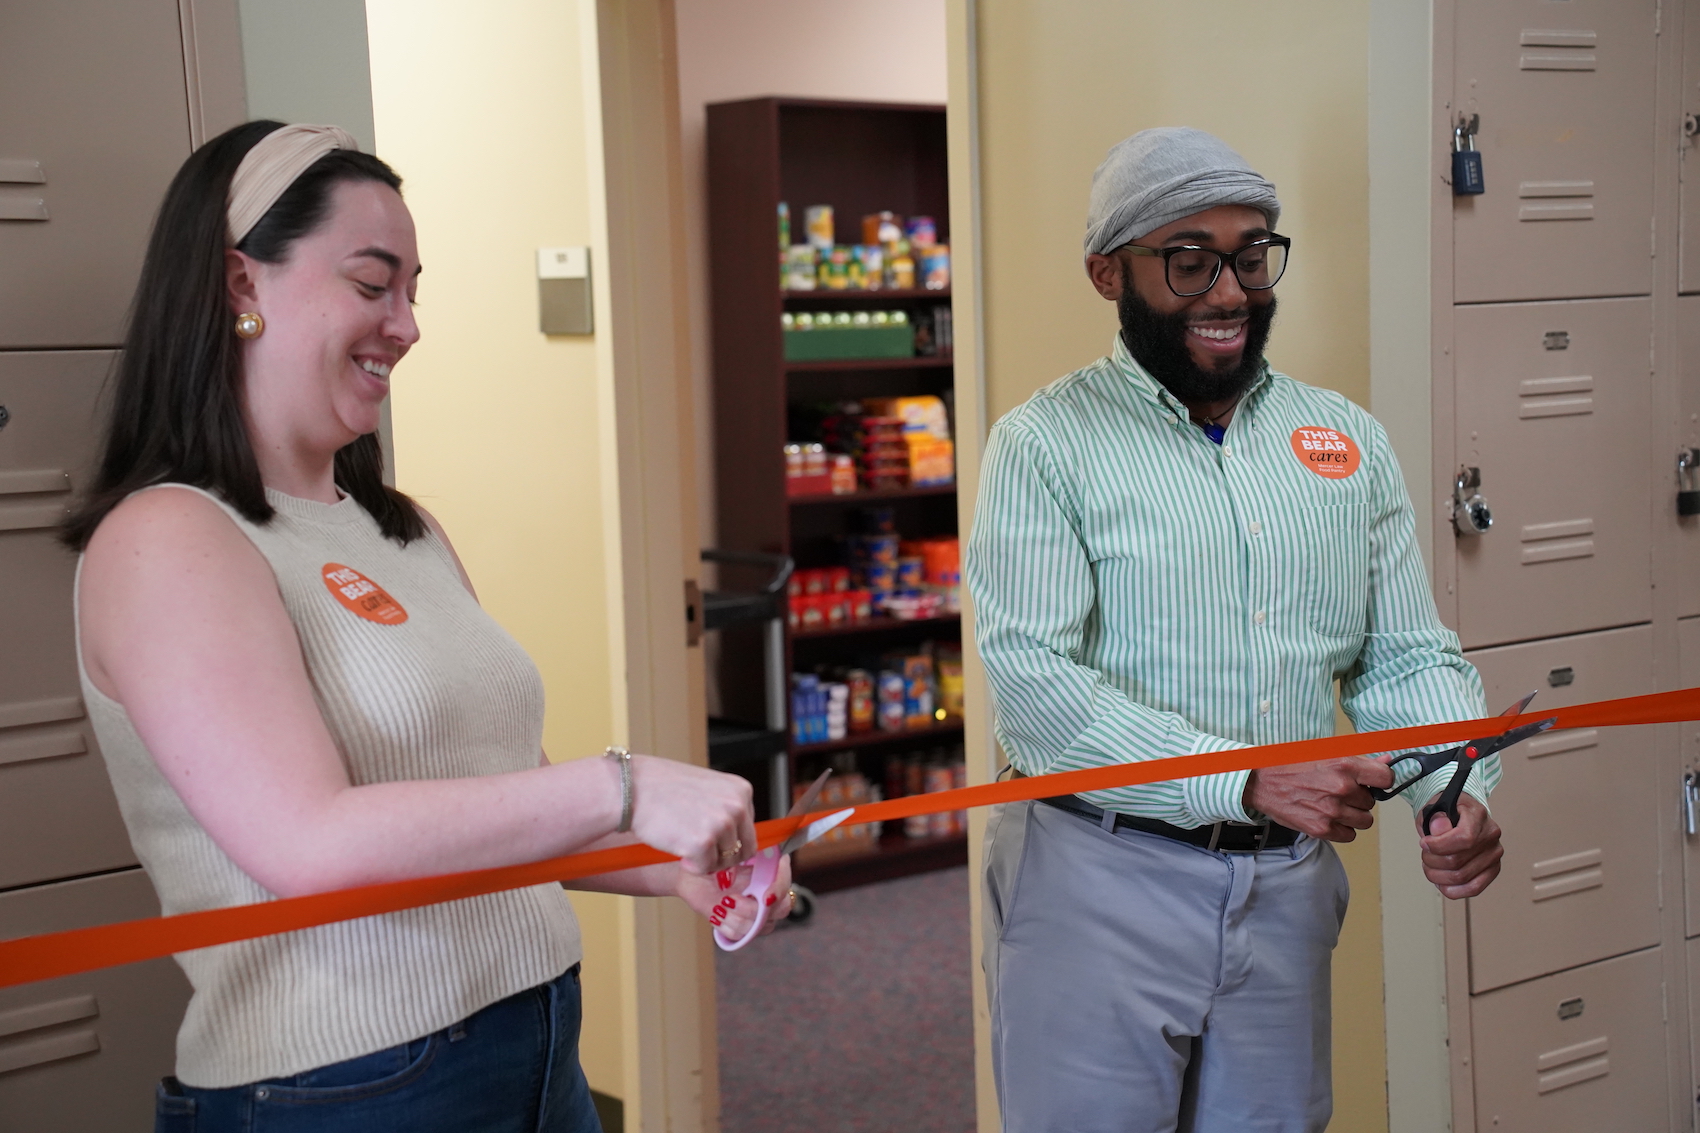 SBA President Katherine Twomey and Director of Admissions & Financial Aid Antonio Squire cut a ribbon for the food pantry